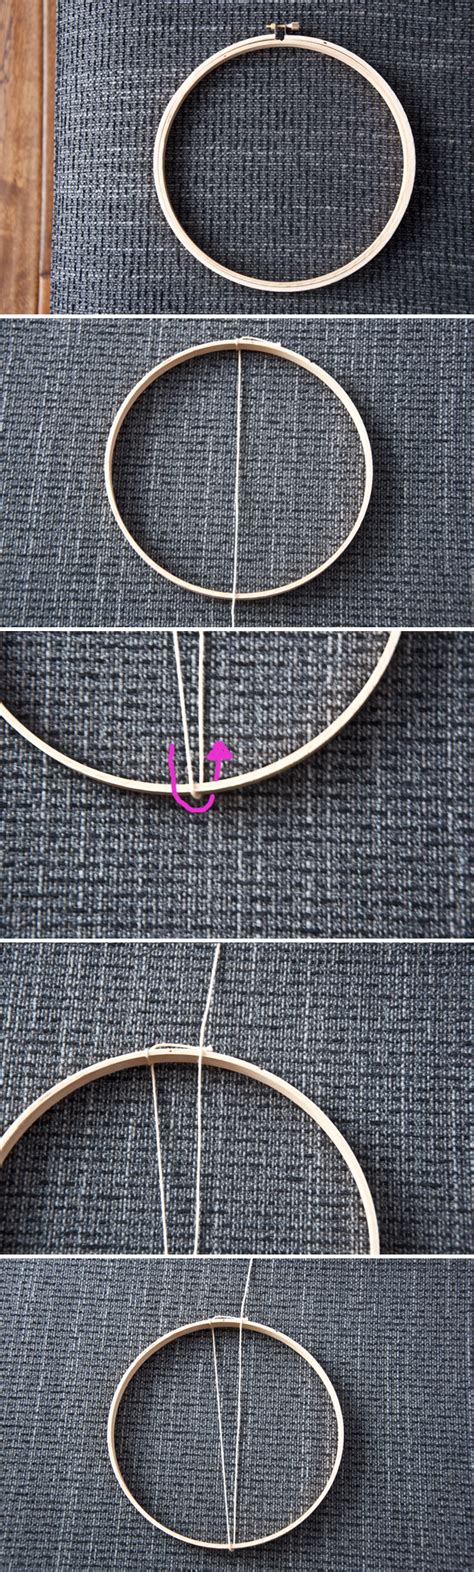 Weaving Lessons How To Use An Embroidery Hoop As A Loom The